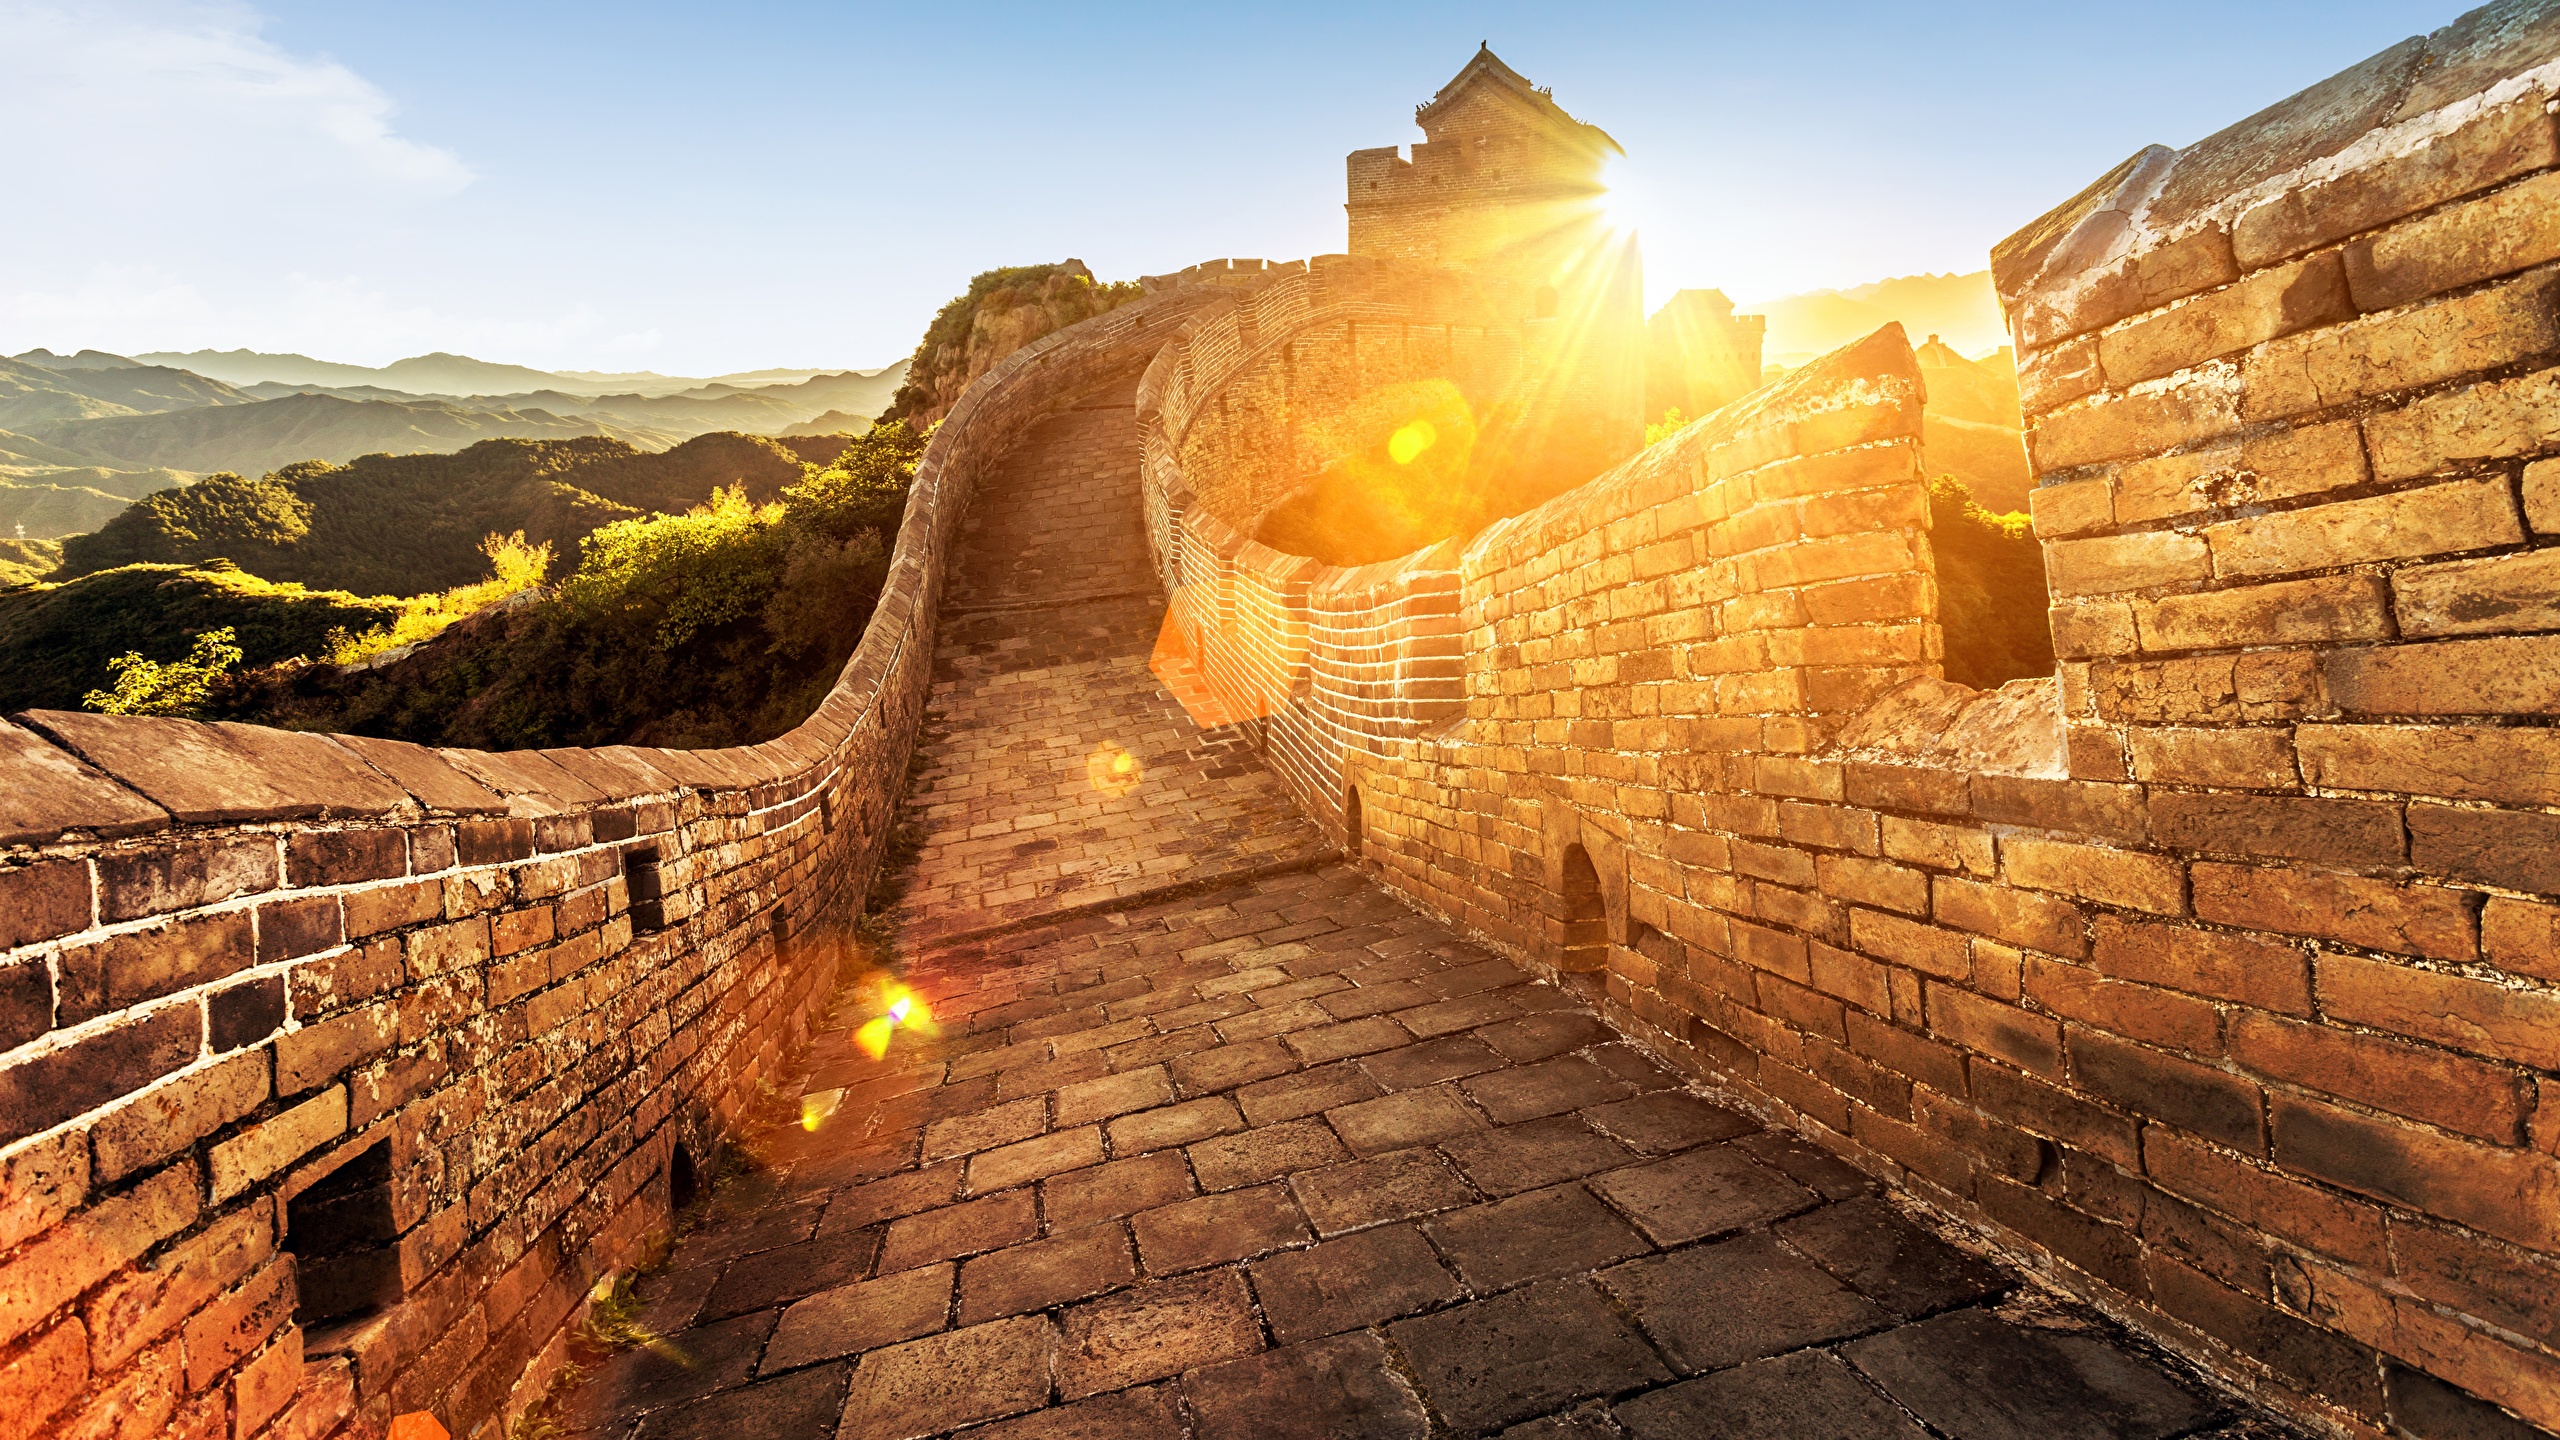 Desktop Wallpapers Nature The Great Wall of China Fence 2560x1440